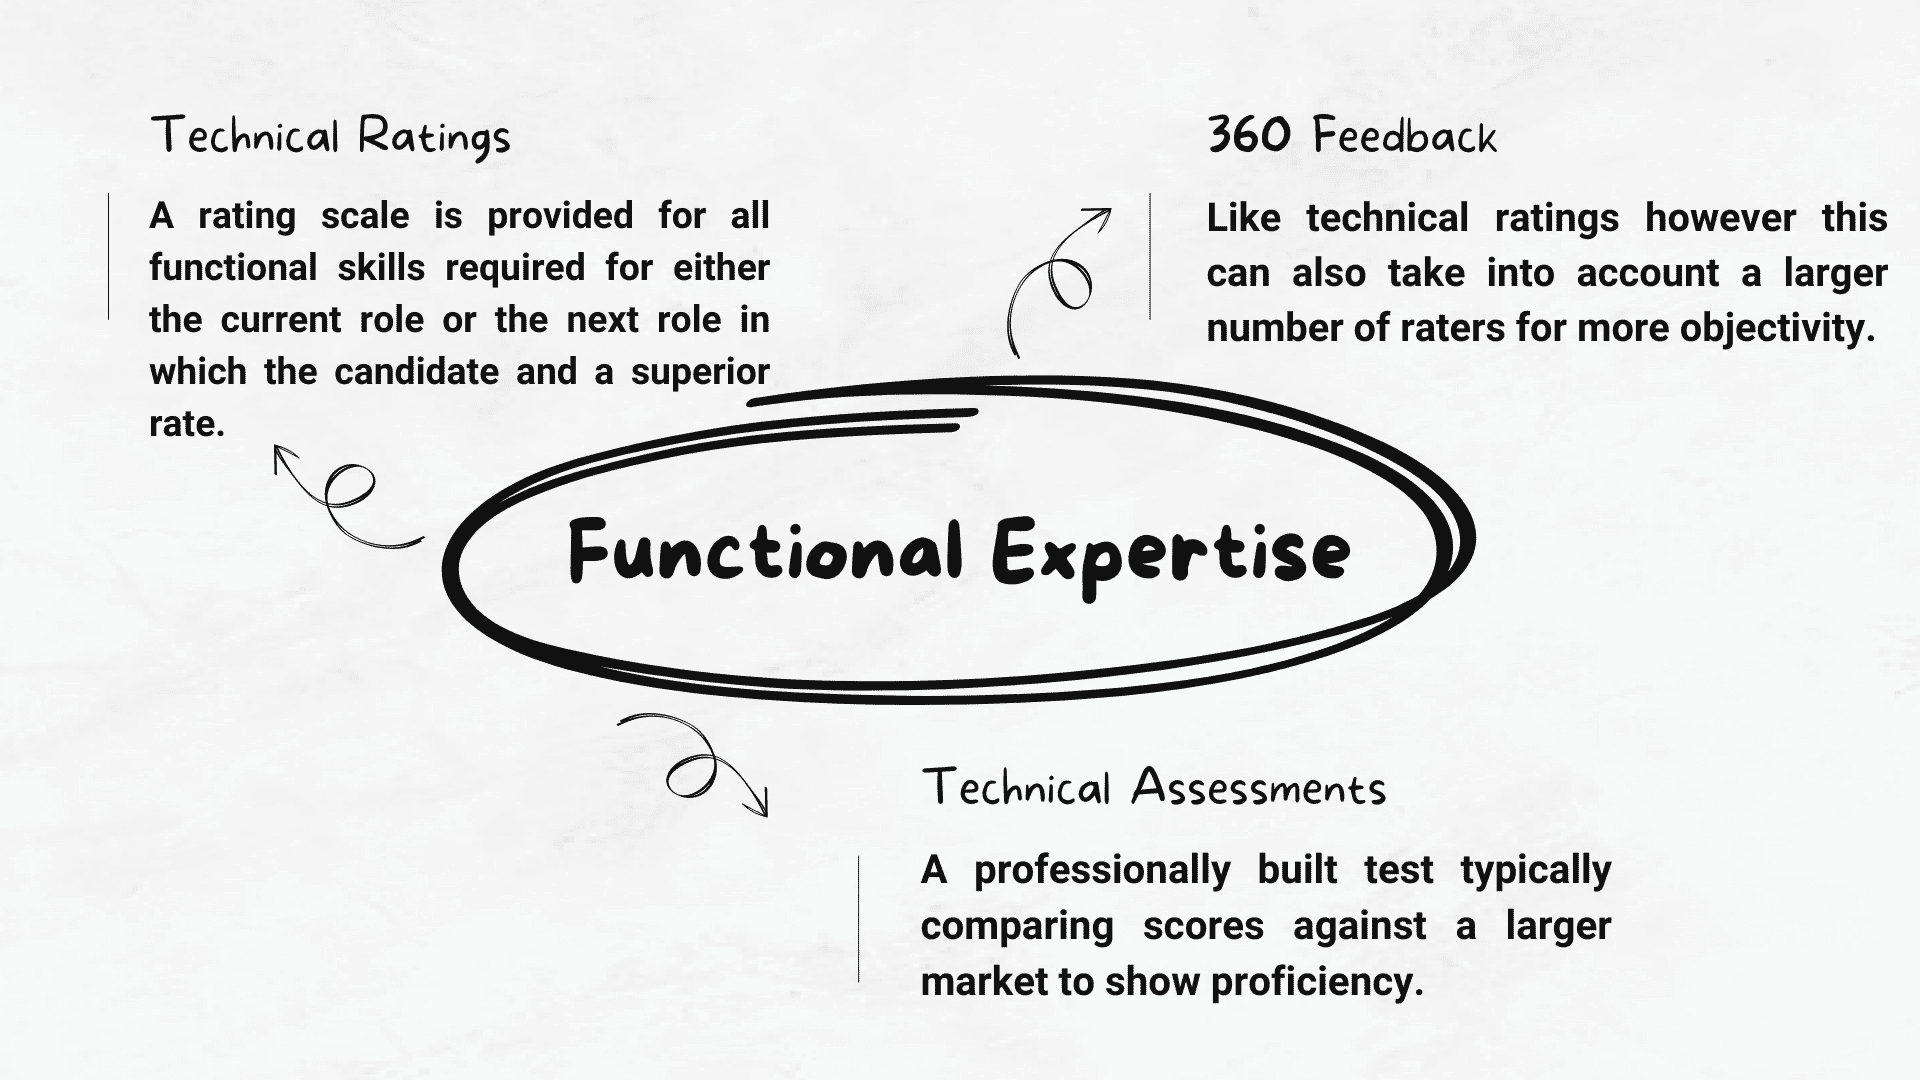 Functional Expertise